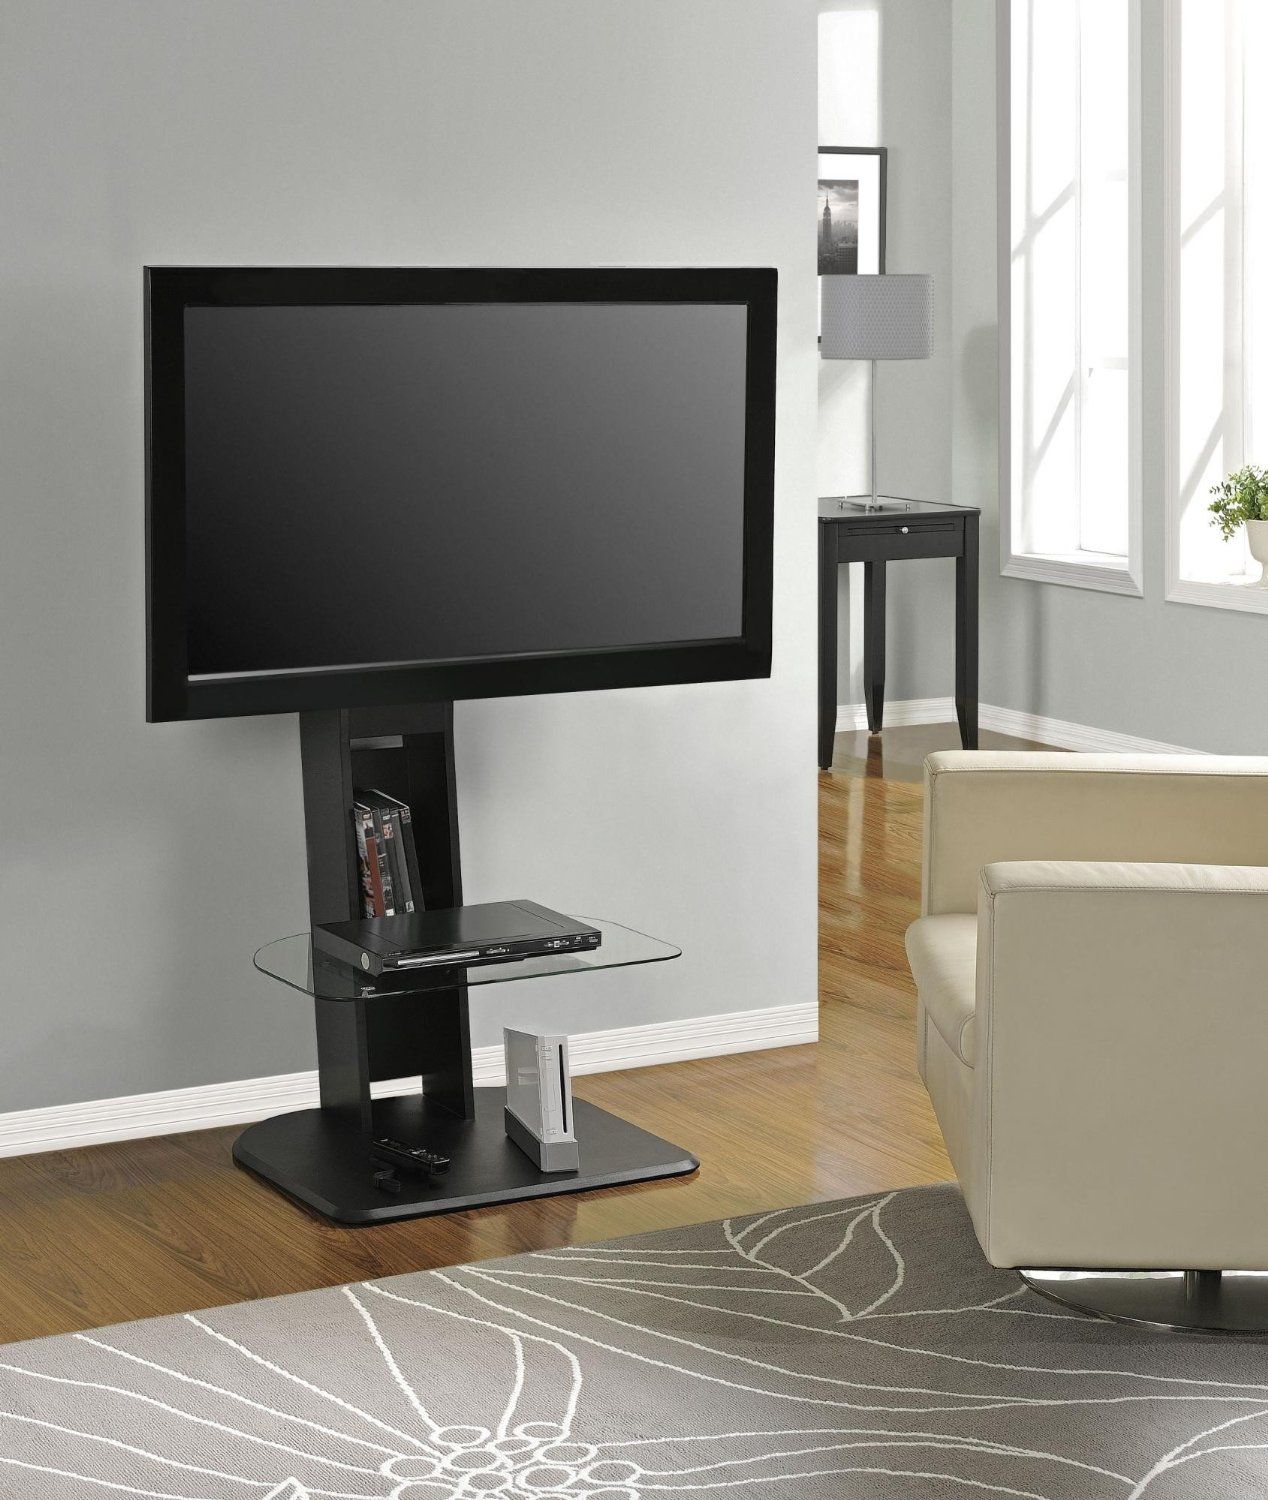 Cool Flat Screen Tv Stands With Mount – Homesfeed For Corner Tv Cabinets For Flat Screens (View 7 of 15)